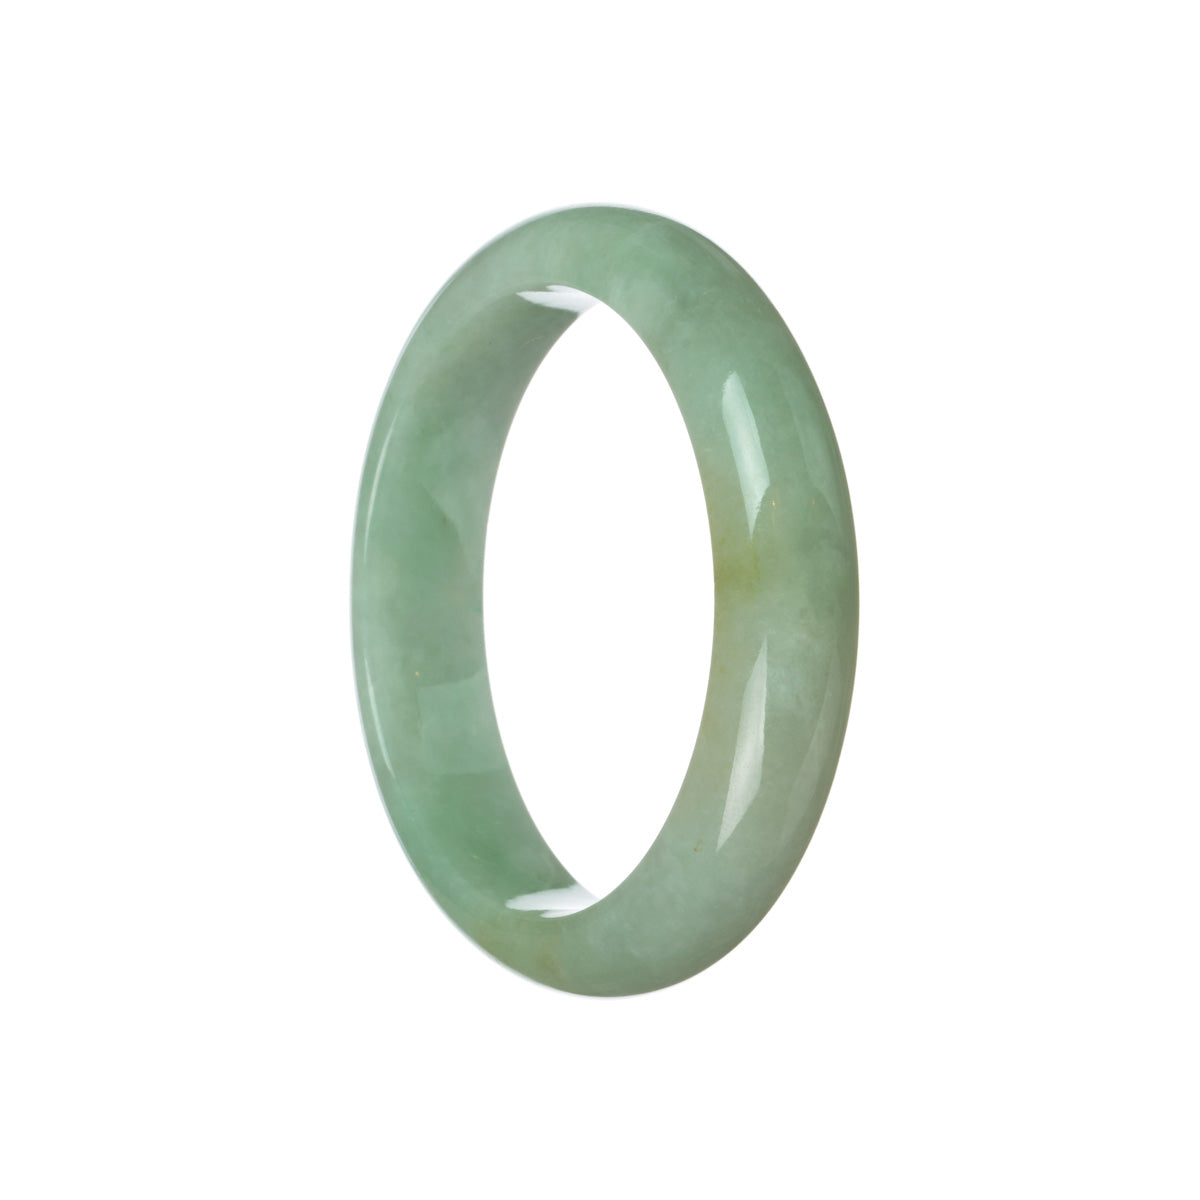 A half-moon shaped, untreated green traditional jade bangle bracelet, certified and measuring 59mm. A beautiful and authentic piece from MAYS GEMS.